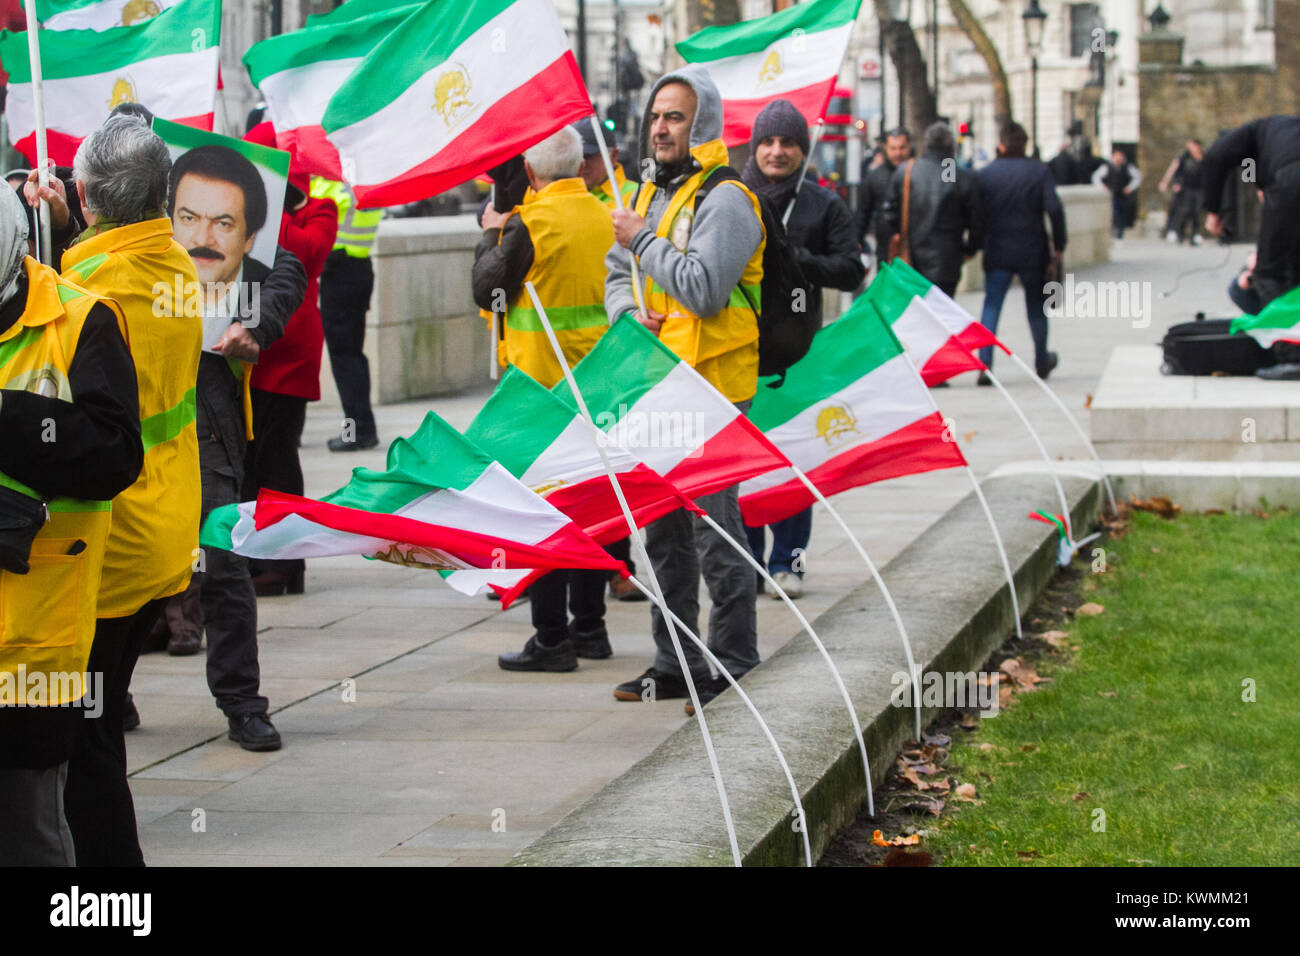 London UK. 4th January 2018. A rally outside No 10 Downing Street  by members of Iran's opposition, the National Resistance of Iran (NCRI) and the People's Mojahedin Organization of Iran (PMOI/MEK)calling on the UK Government to break its silence and condemn the killings and crackdown of protesters by the Iranian clerical regime of President Rouhani and Supreme leader  Ayatollah Ali Khamenei Stock Photo